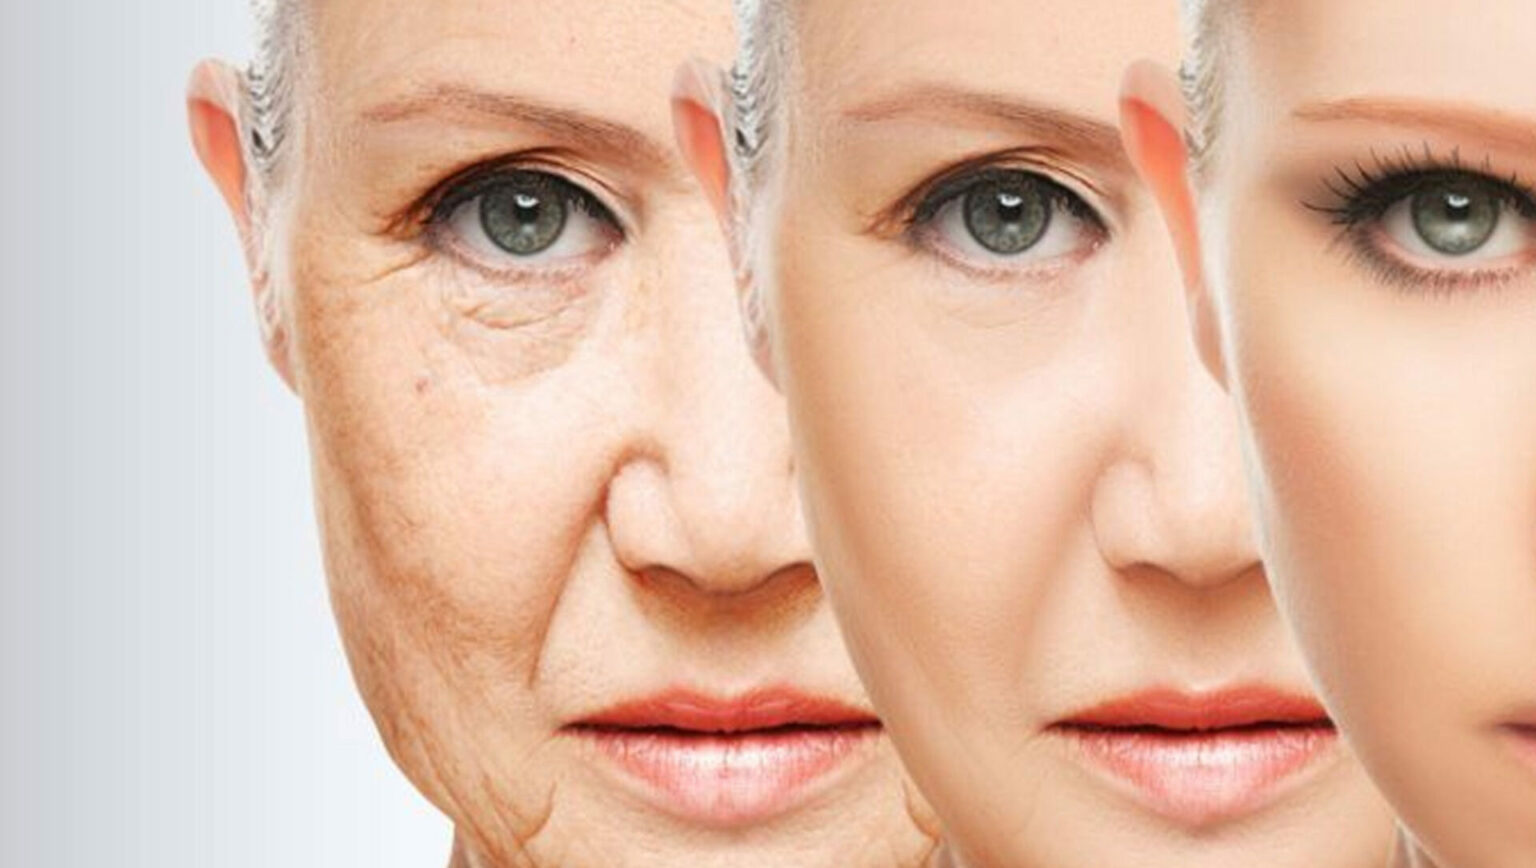 Newly discovered Peptide reflects Human Skin Age - Asiana Times